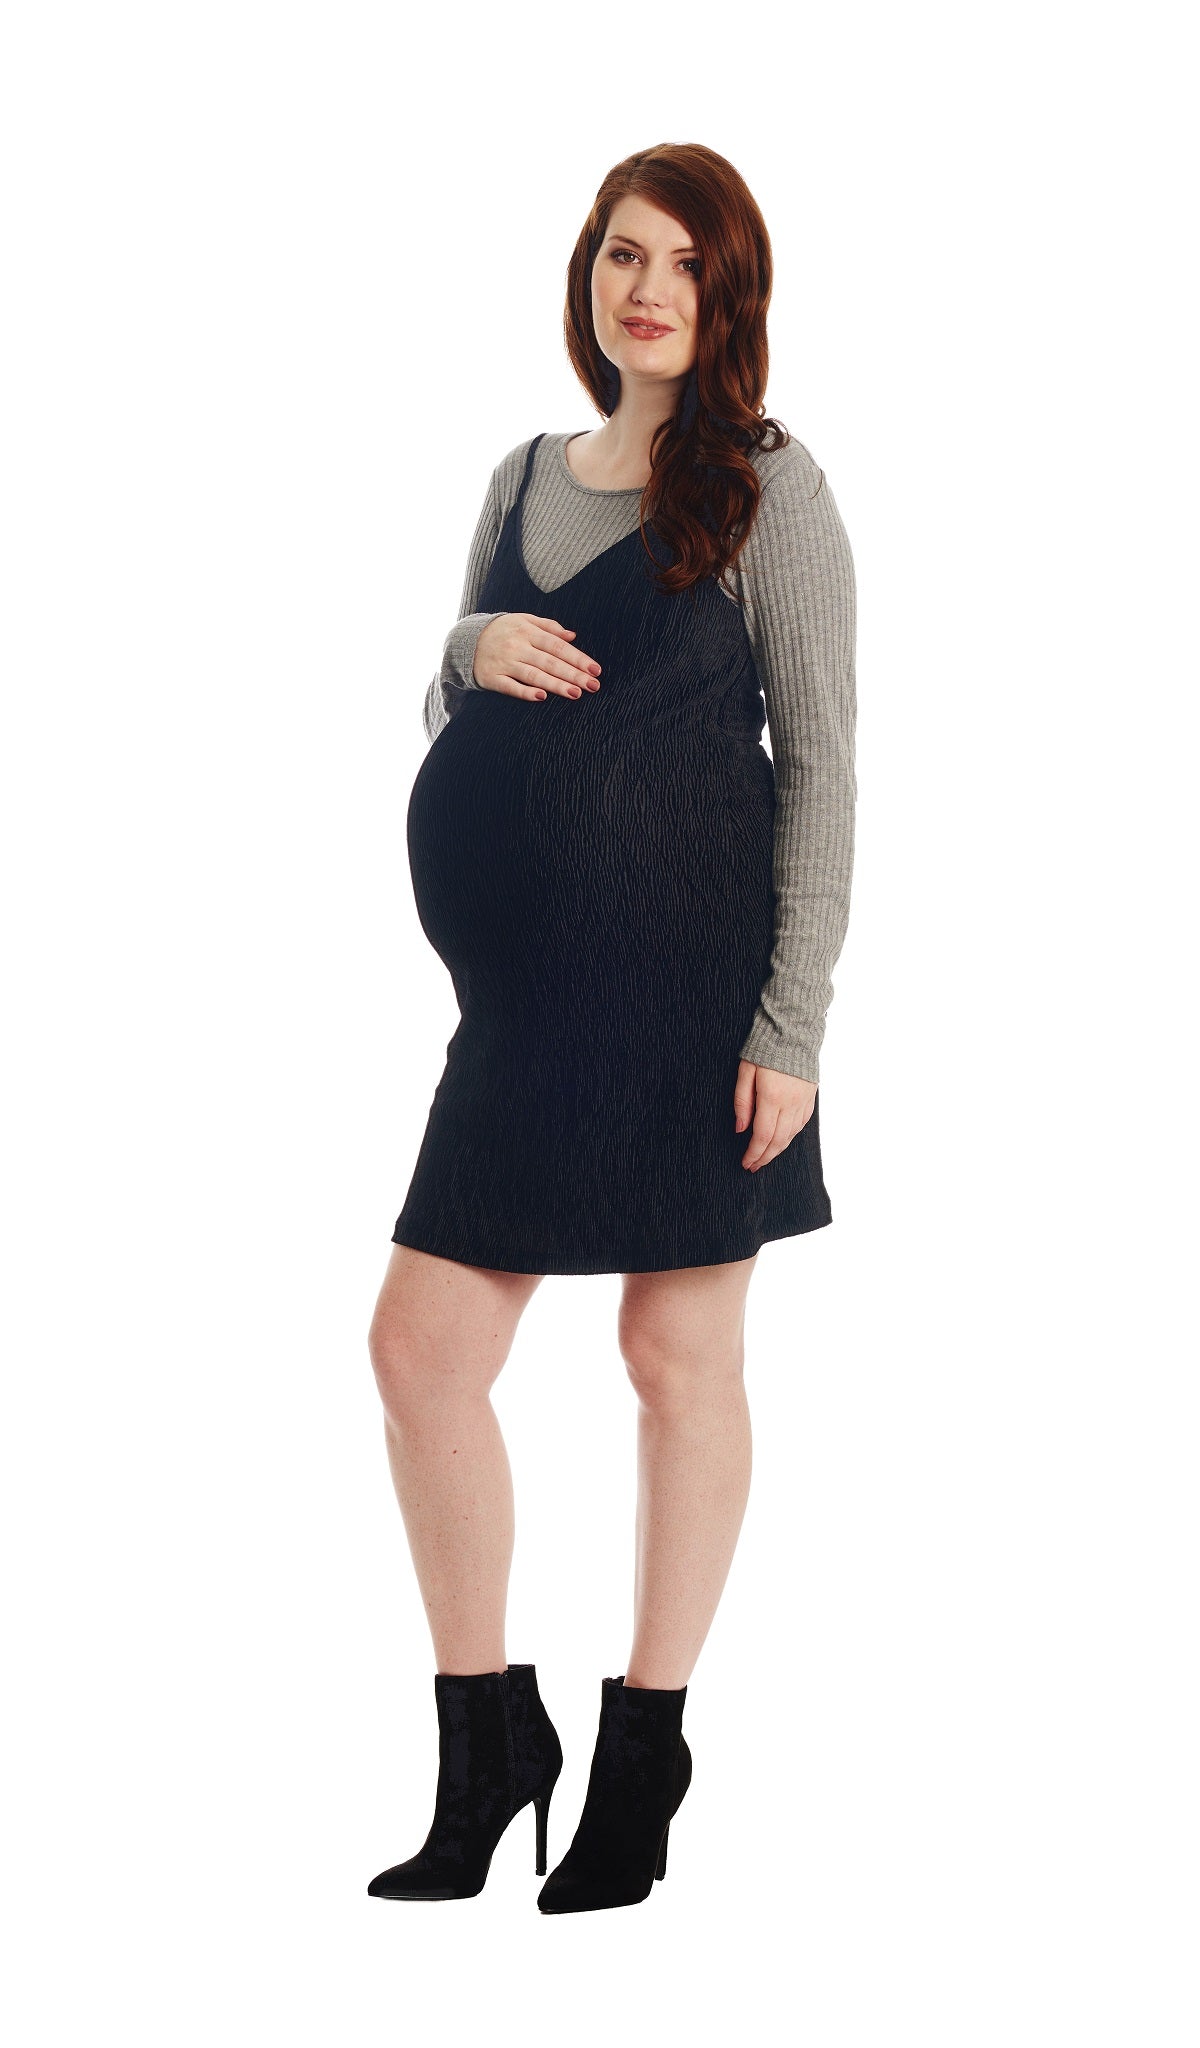 Black Aurora dress worn by pregnant woman with Cristiano long sleeve grey top layered underneath.